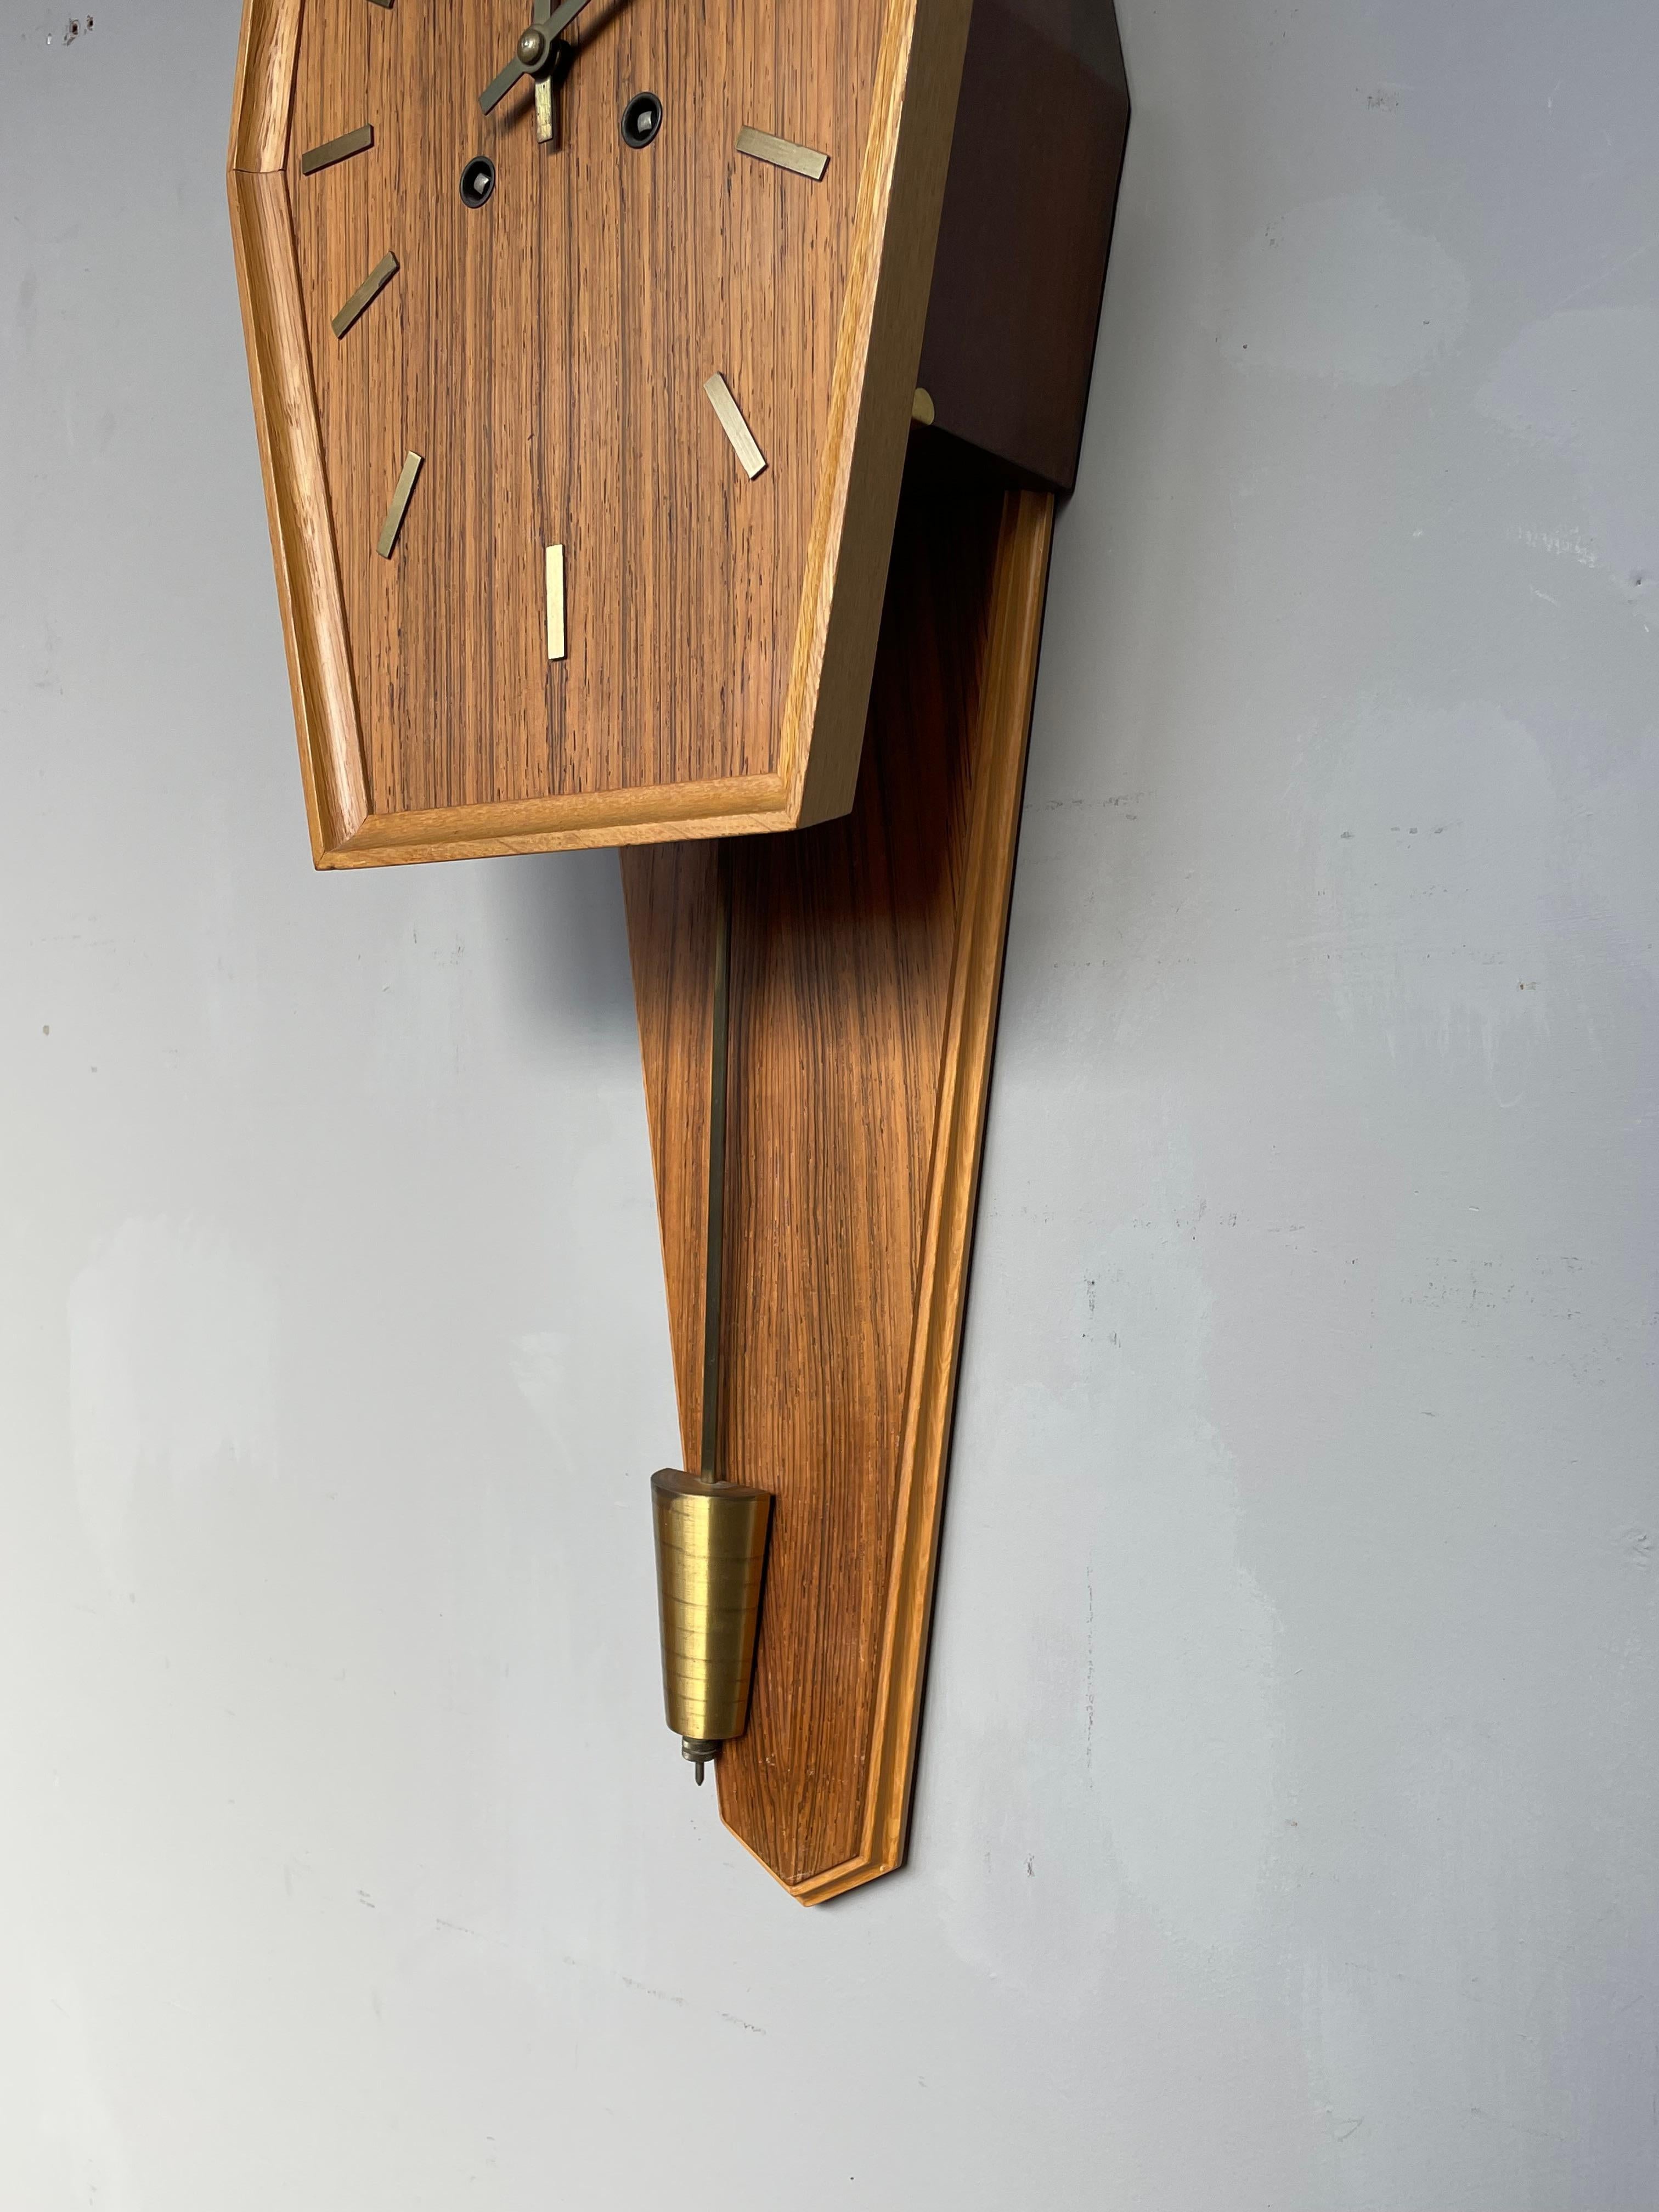 Beautiful Midcentury Modern Wooden Pendulum Wall Clock By Westerstrand, Sweden For Sale 4